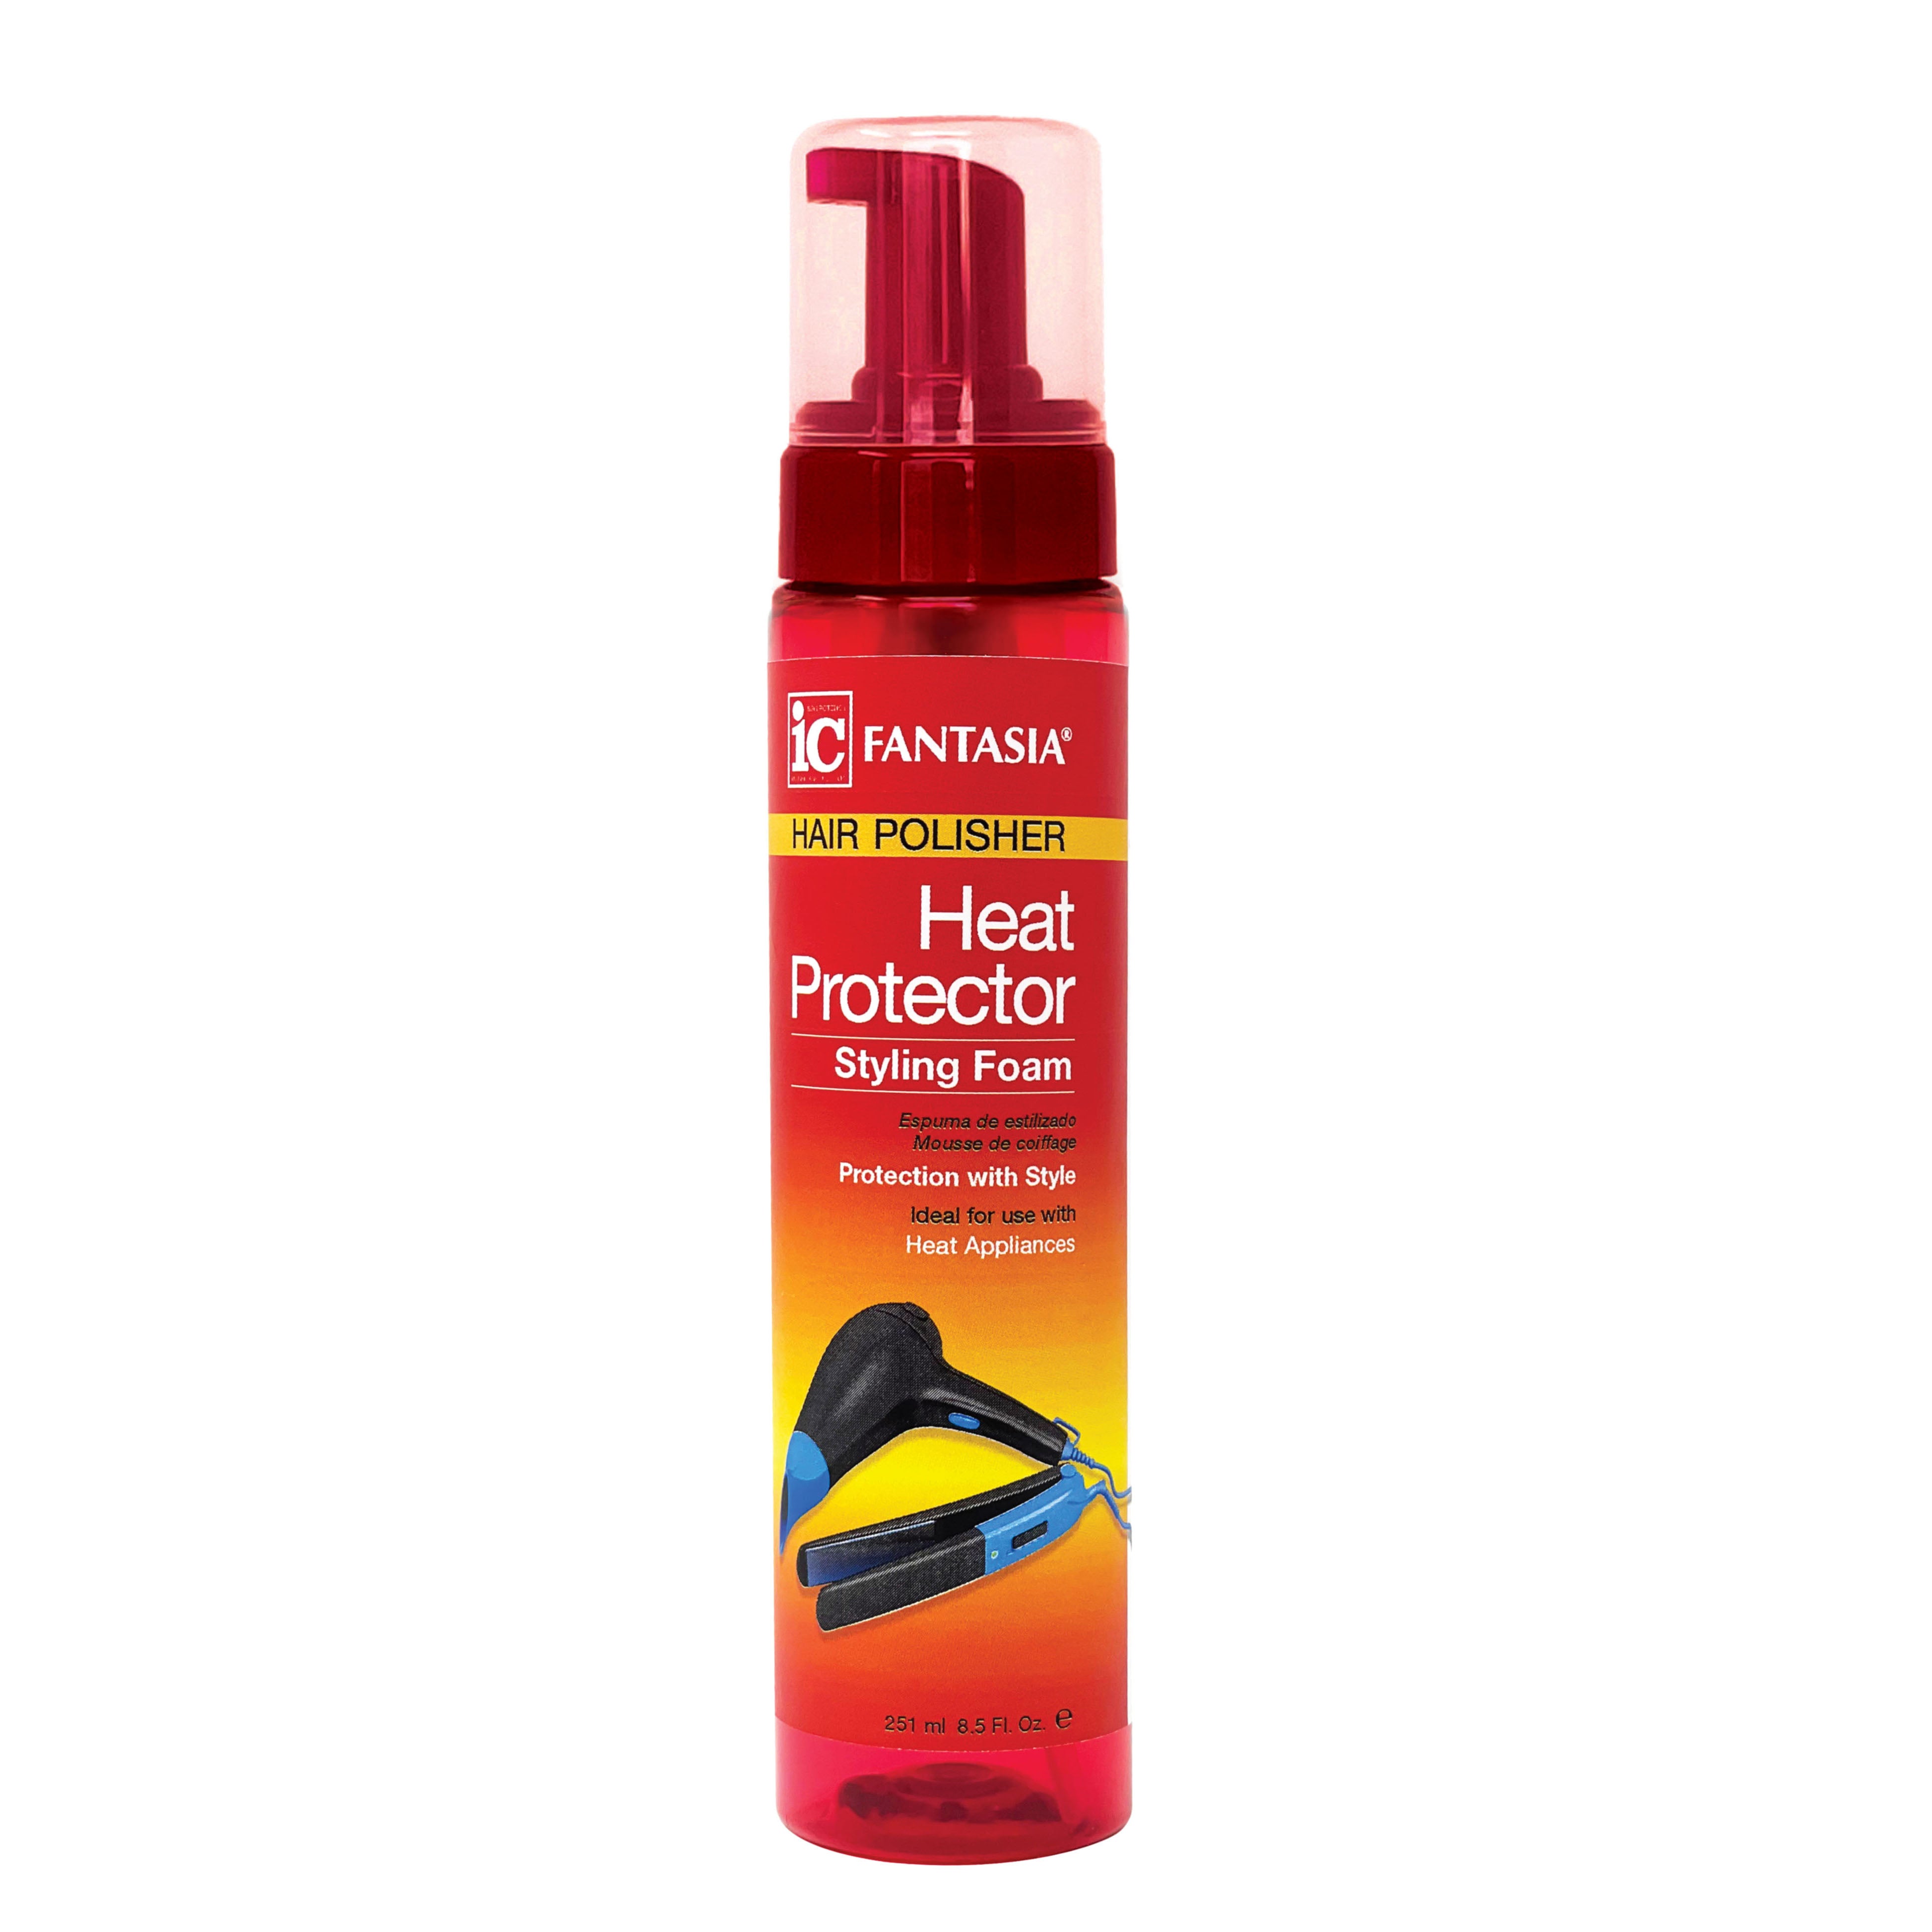 HEAT PROTECTOR NEW! FOAM Hair Industries OZ) Fantasia (8.5 Care – STYLING 